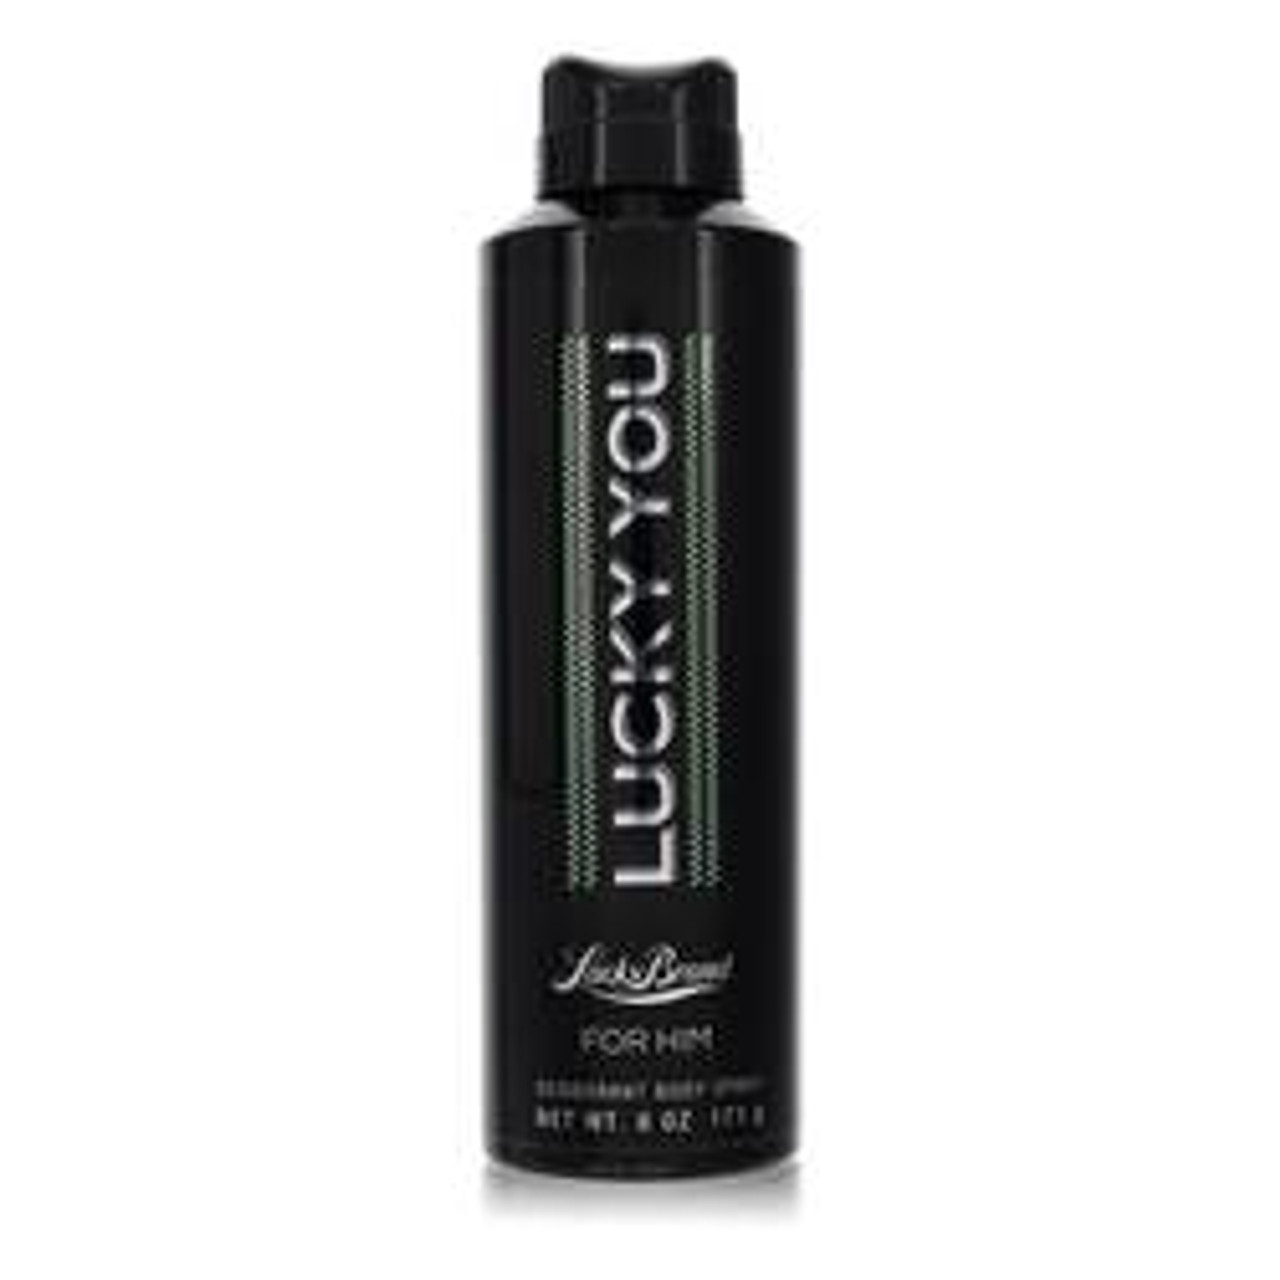 Lucky You Cologne By Liz Claiborne Deodorant Spray 6 oz for Men - [From 19.00 - Choose pk Qty ] - *Ships from Miami